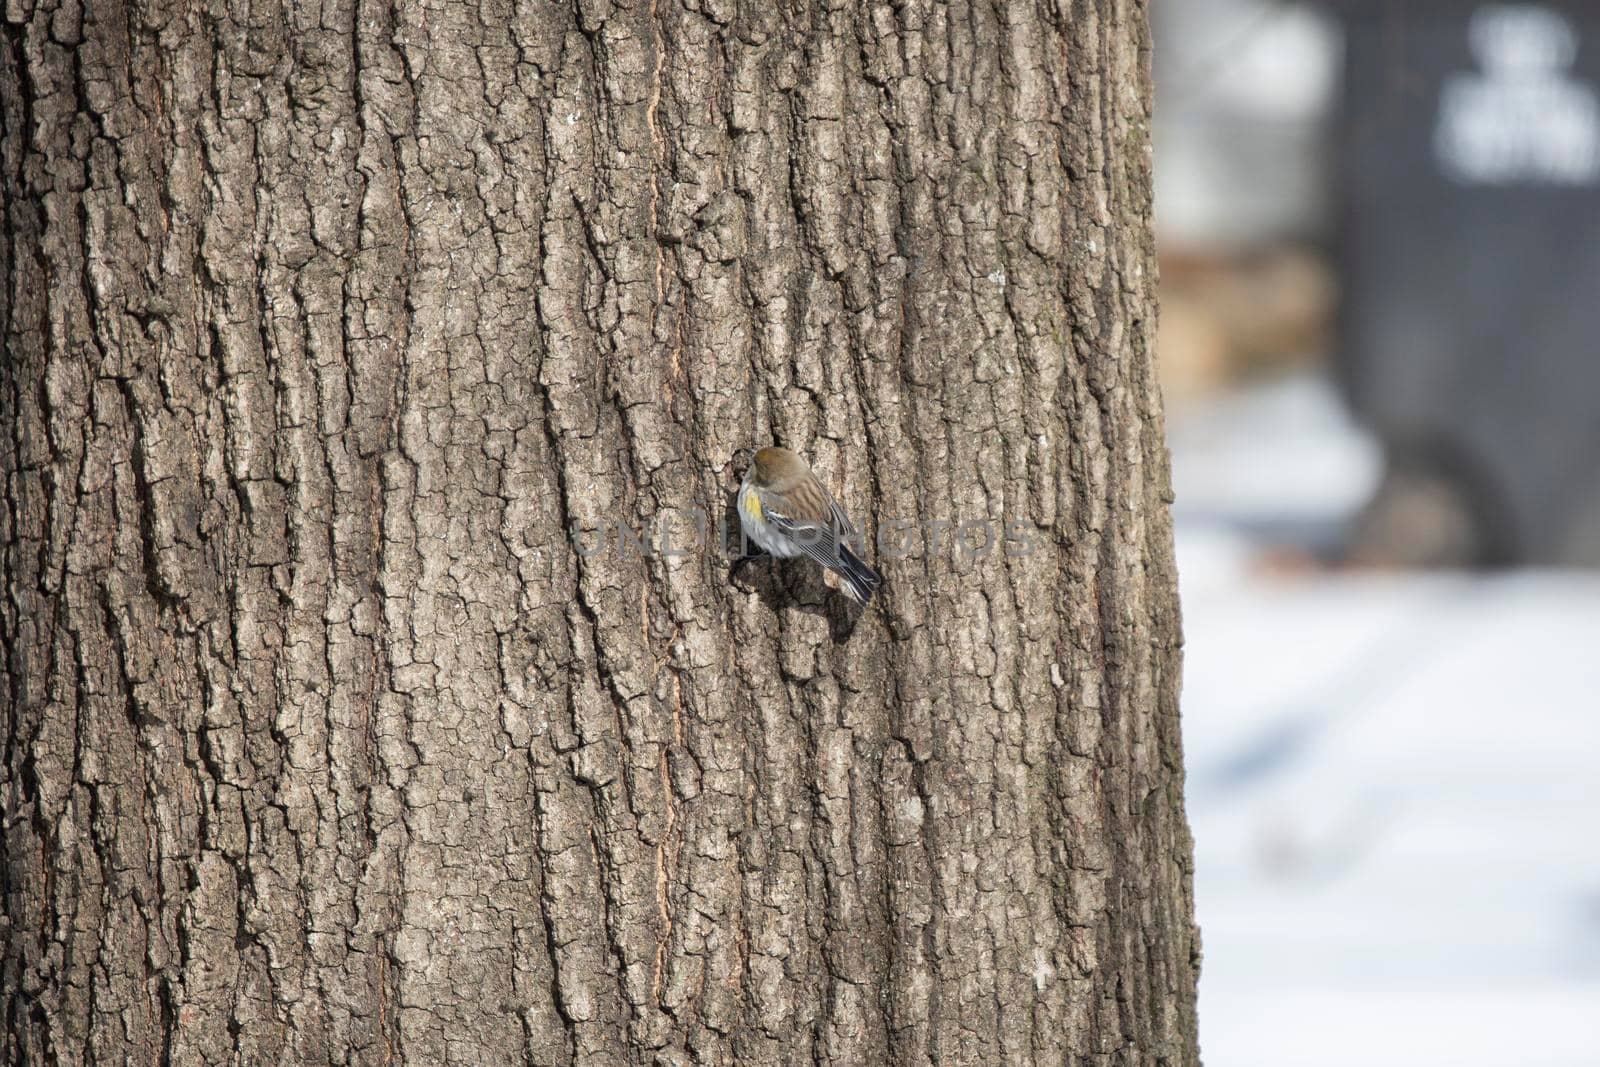 Female yellow-rumped warbler (Setophaga coronata) foraging on a tree trunk with snow in the background